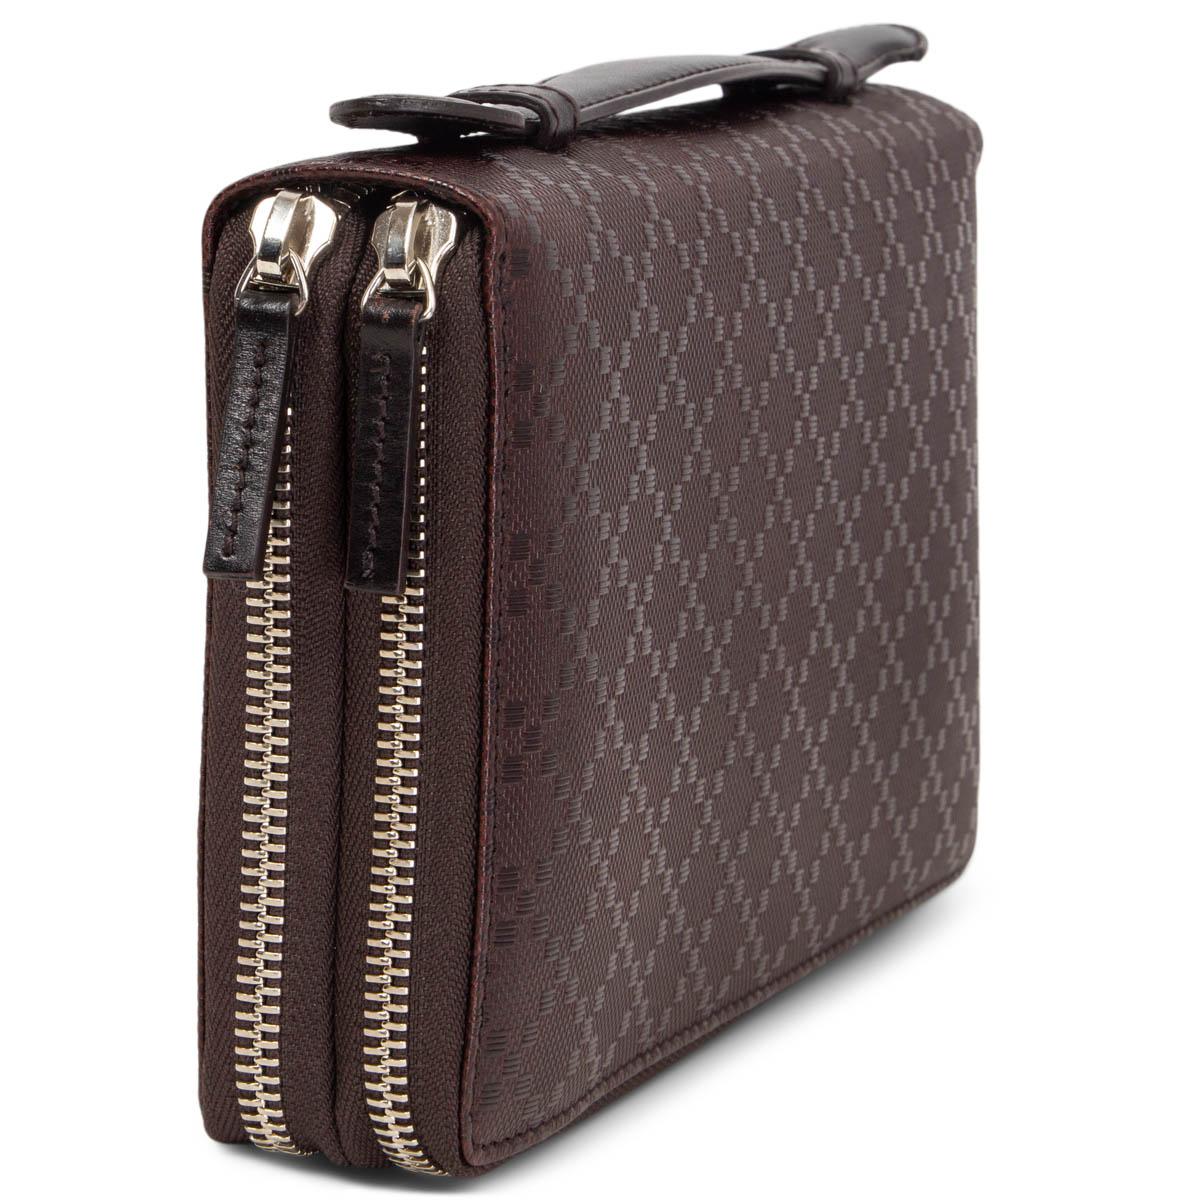 100% authentic Gucci top handle travel wallet in dark brown calf skin. Opens with two zippers and is lined in dark brown calf leather. Comes with a zipper coin pocket, 22 credit card slots, two extra slit pockets, a pen holder,  and four big slit